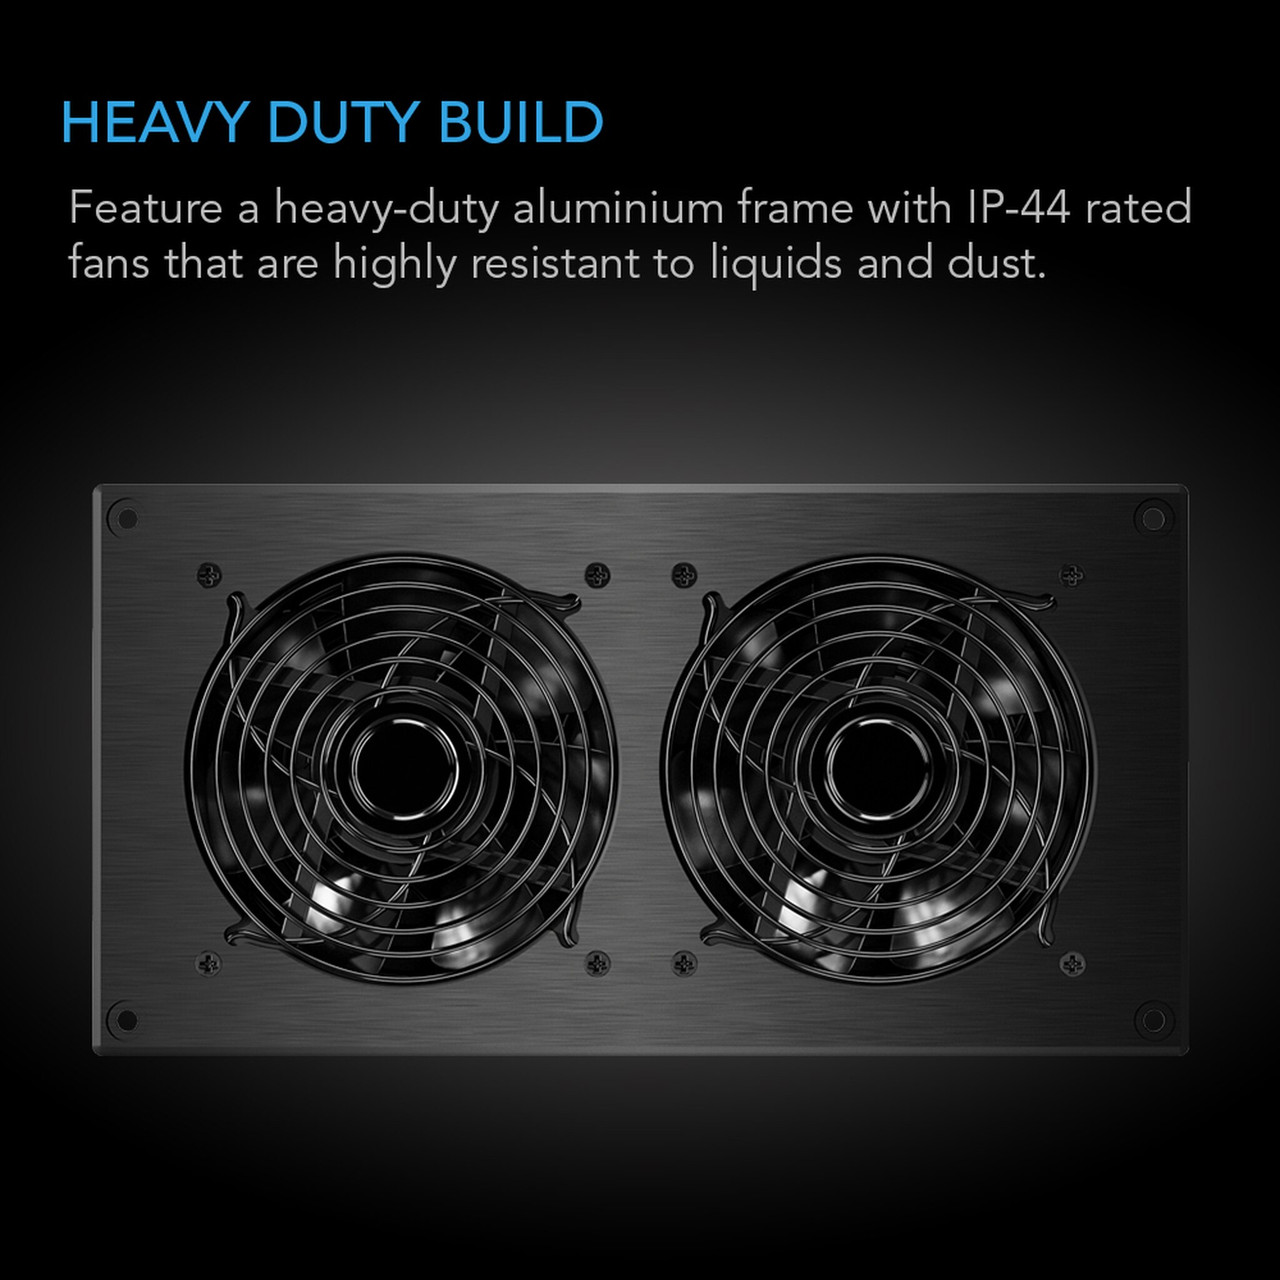 AC Infinity AIRTITAN T7, Ventilation Fan 12 with Temperature Humidity